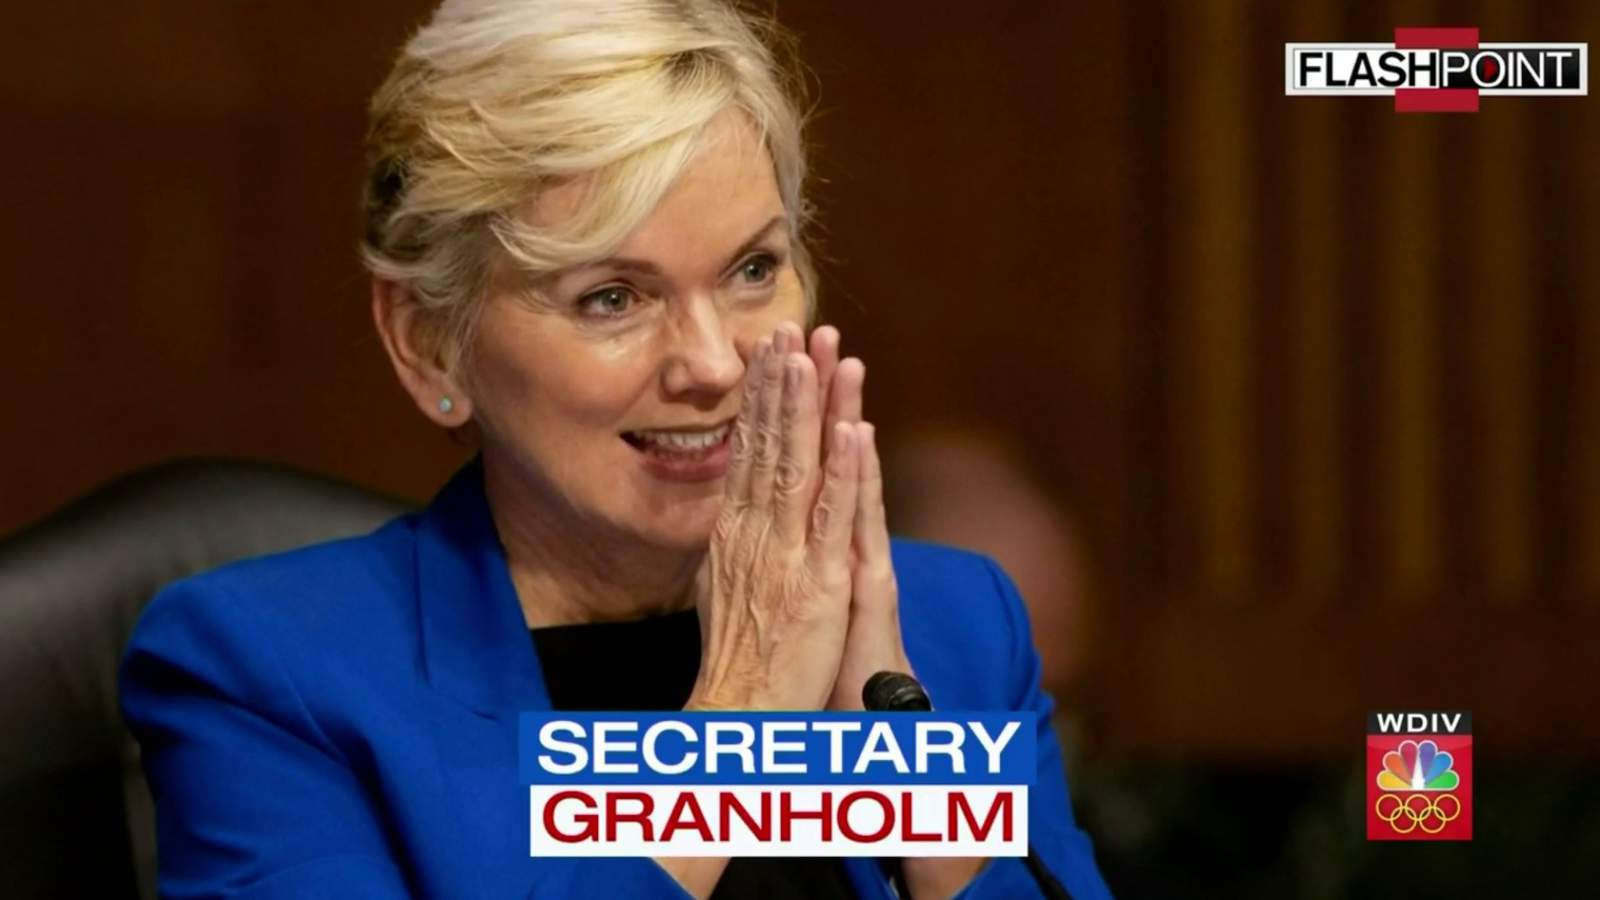 Flashpoint recap: Energy secretary Jennifer Granholm, county leaders weigh in on crucial issues